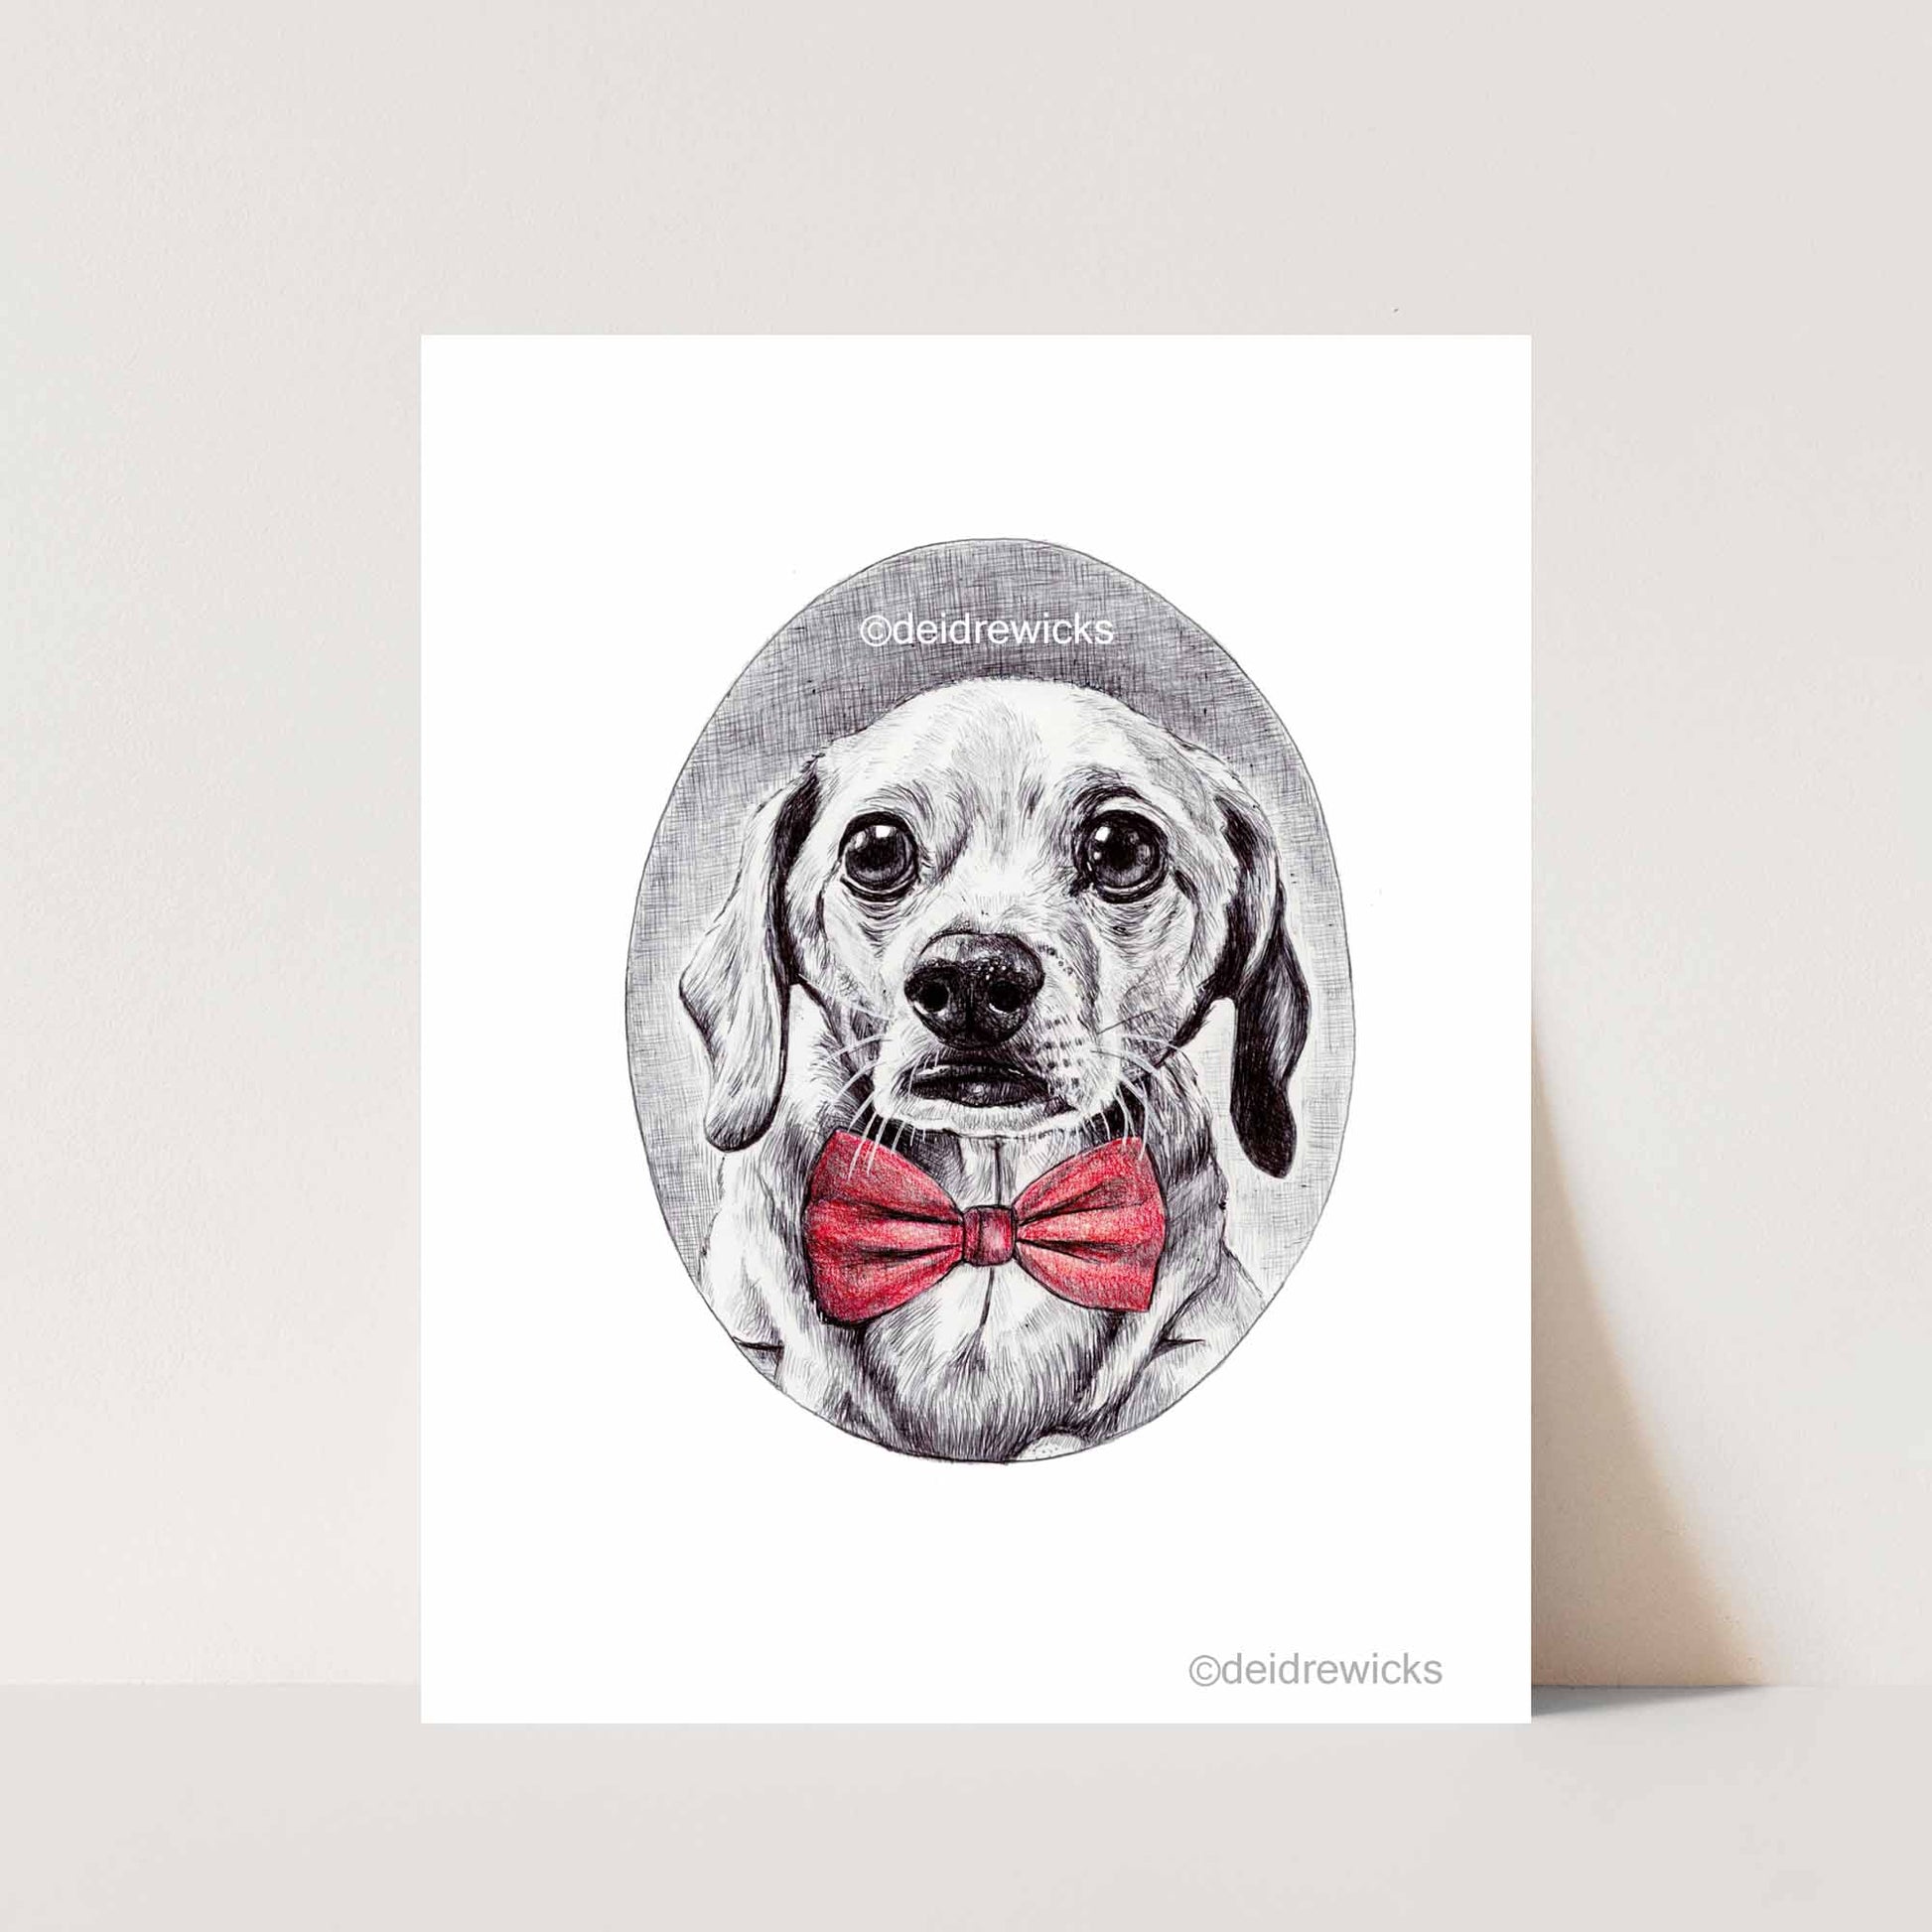 Pen illustration of a dachshund mix dog wearing a red bow tie. Original art by Deidre Wicks